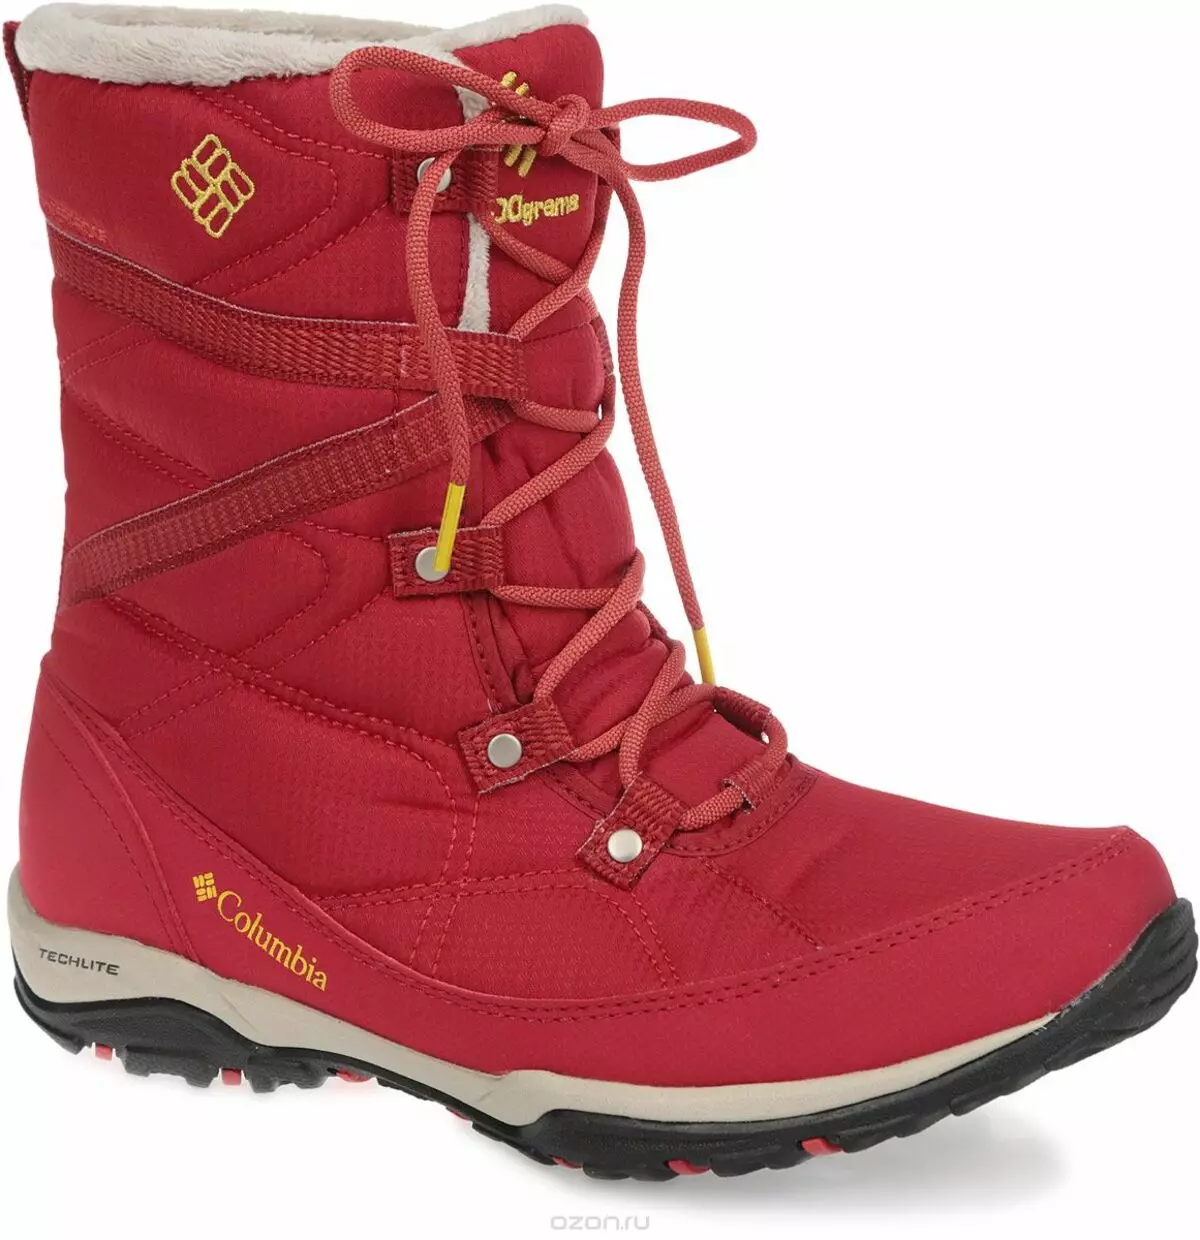 Kombia boots (64 photos): Women's winter and insulated children's models for girls Bugaboot and Minx, COLUMBIA reviews 2268_32